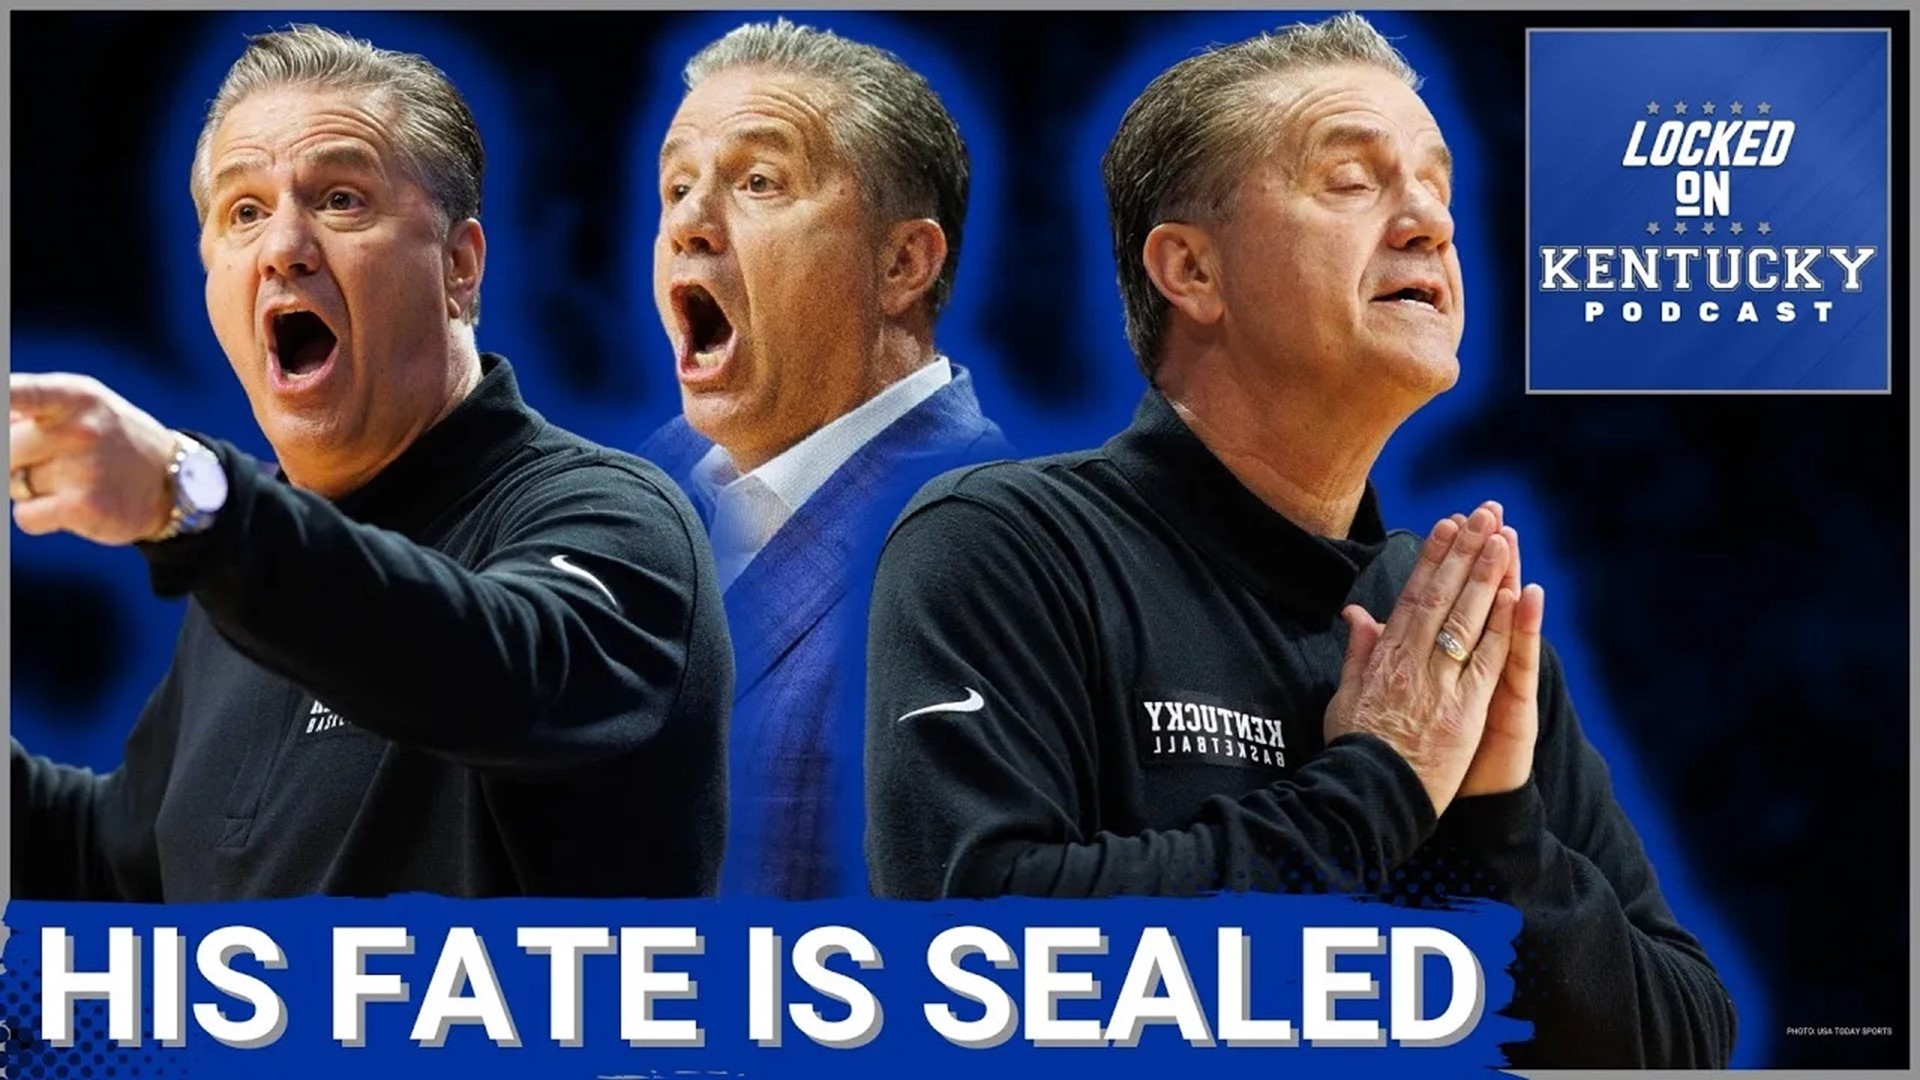 Unless something changes, it seems like John Calipari's future with Kentucky basketball has been decided.